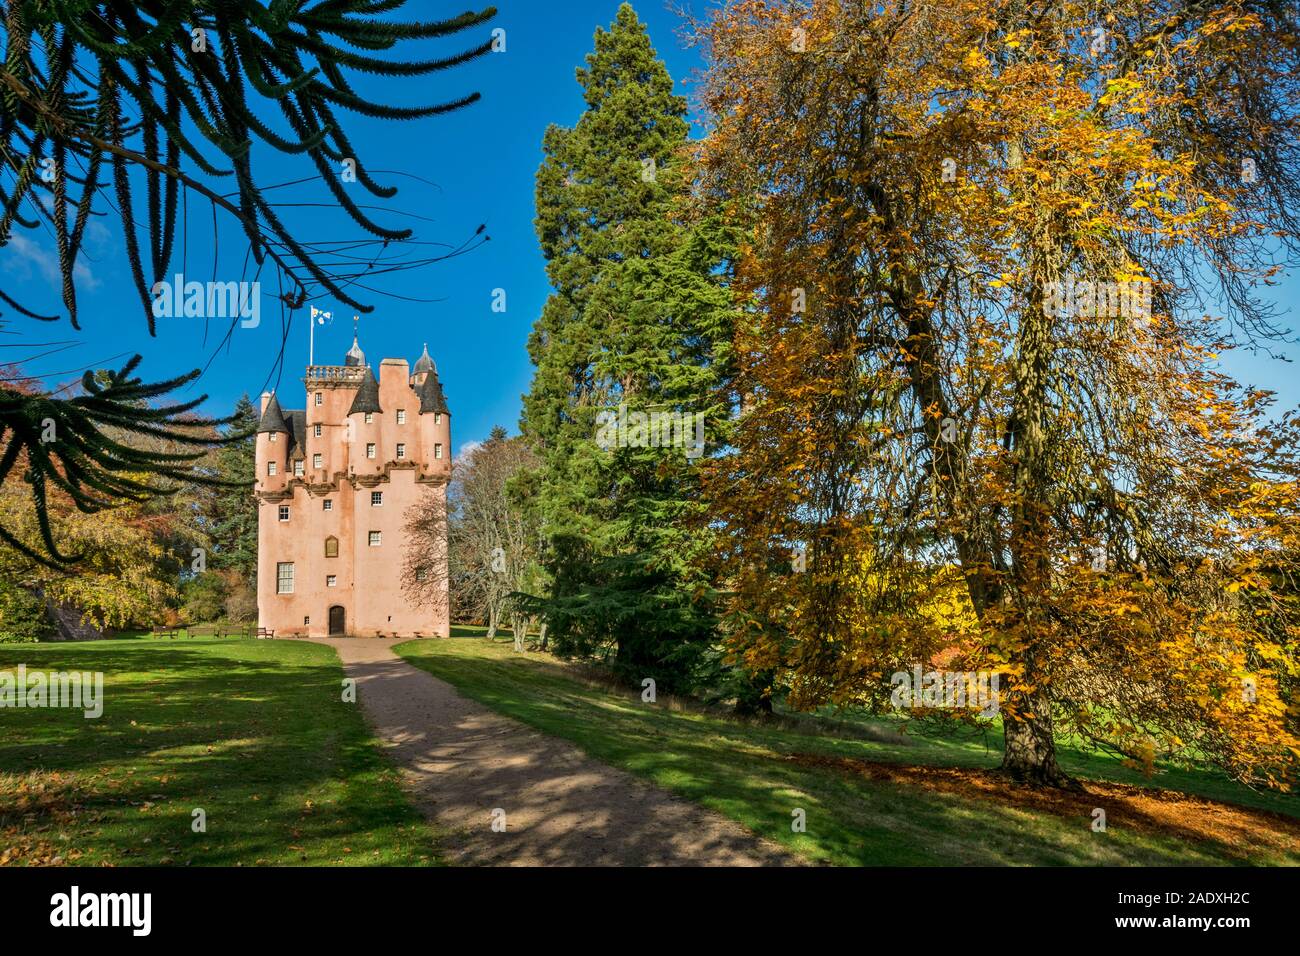 CRAIGIEVAR CASTLE ABERDEENSHIRE SCOTLAND THE PINK CASTLE SURROUNDED BY TREES WITH COLOURED AUTUMNAL LEAVES Stock Photo